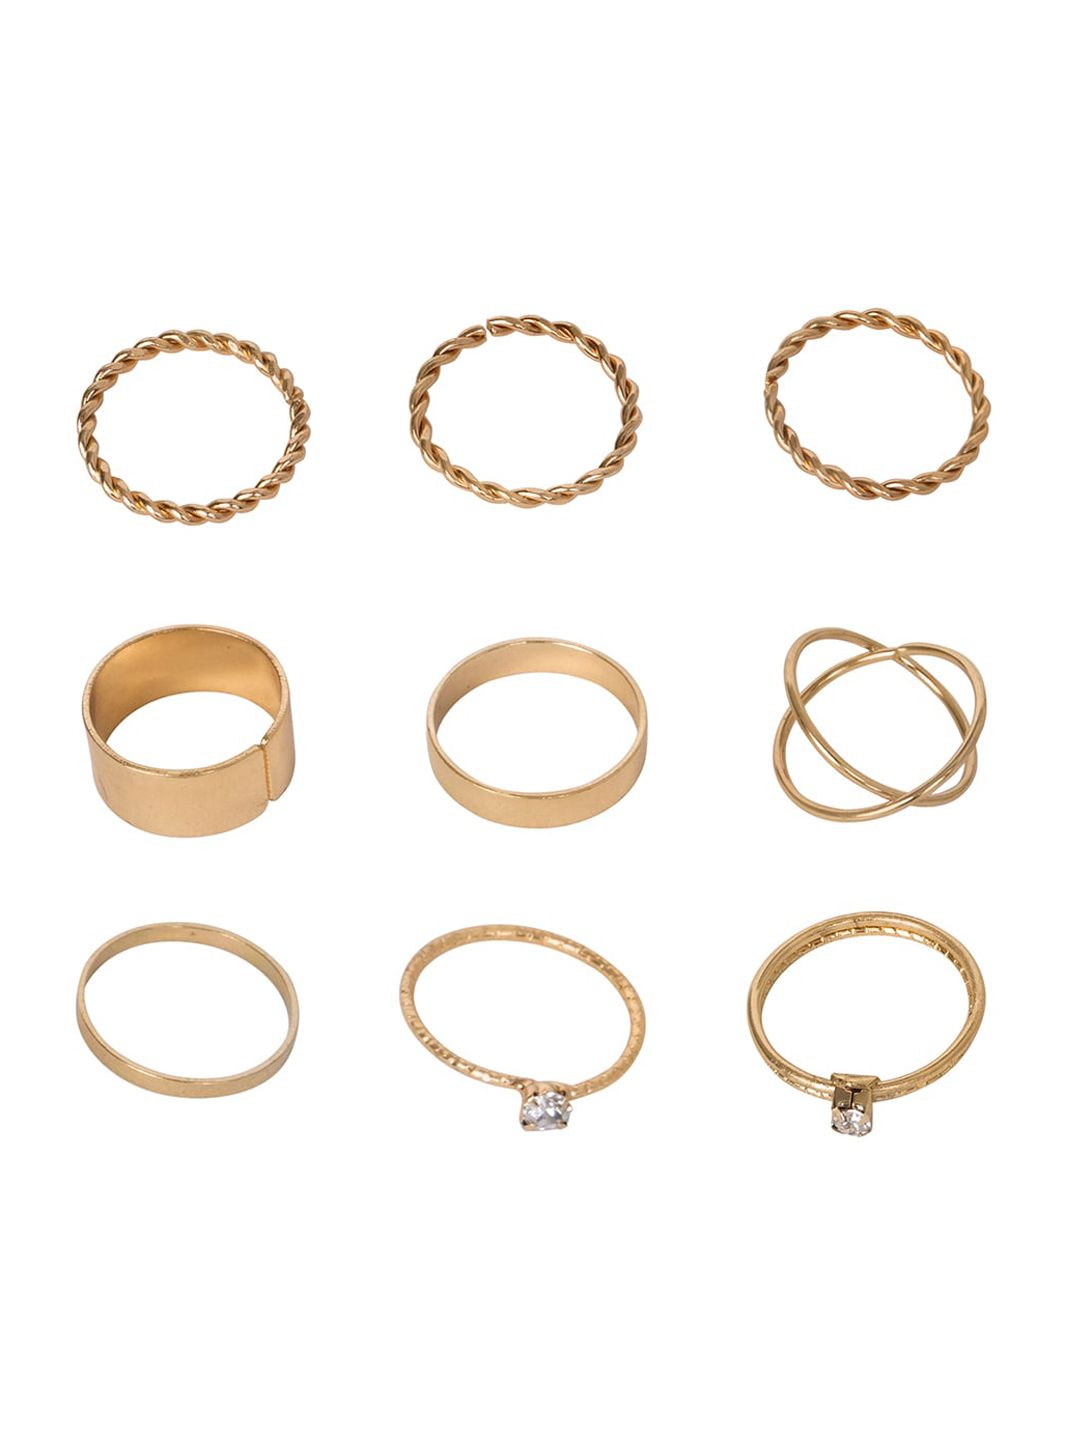 FabAlley Ring Set Of 6 Price in India